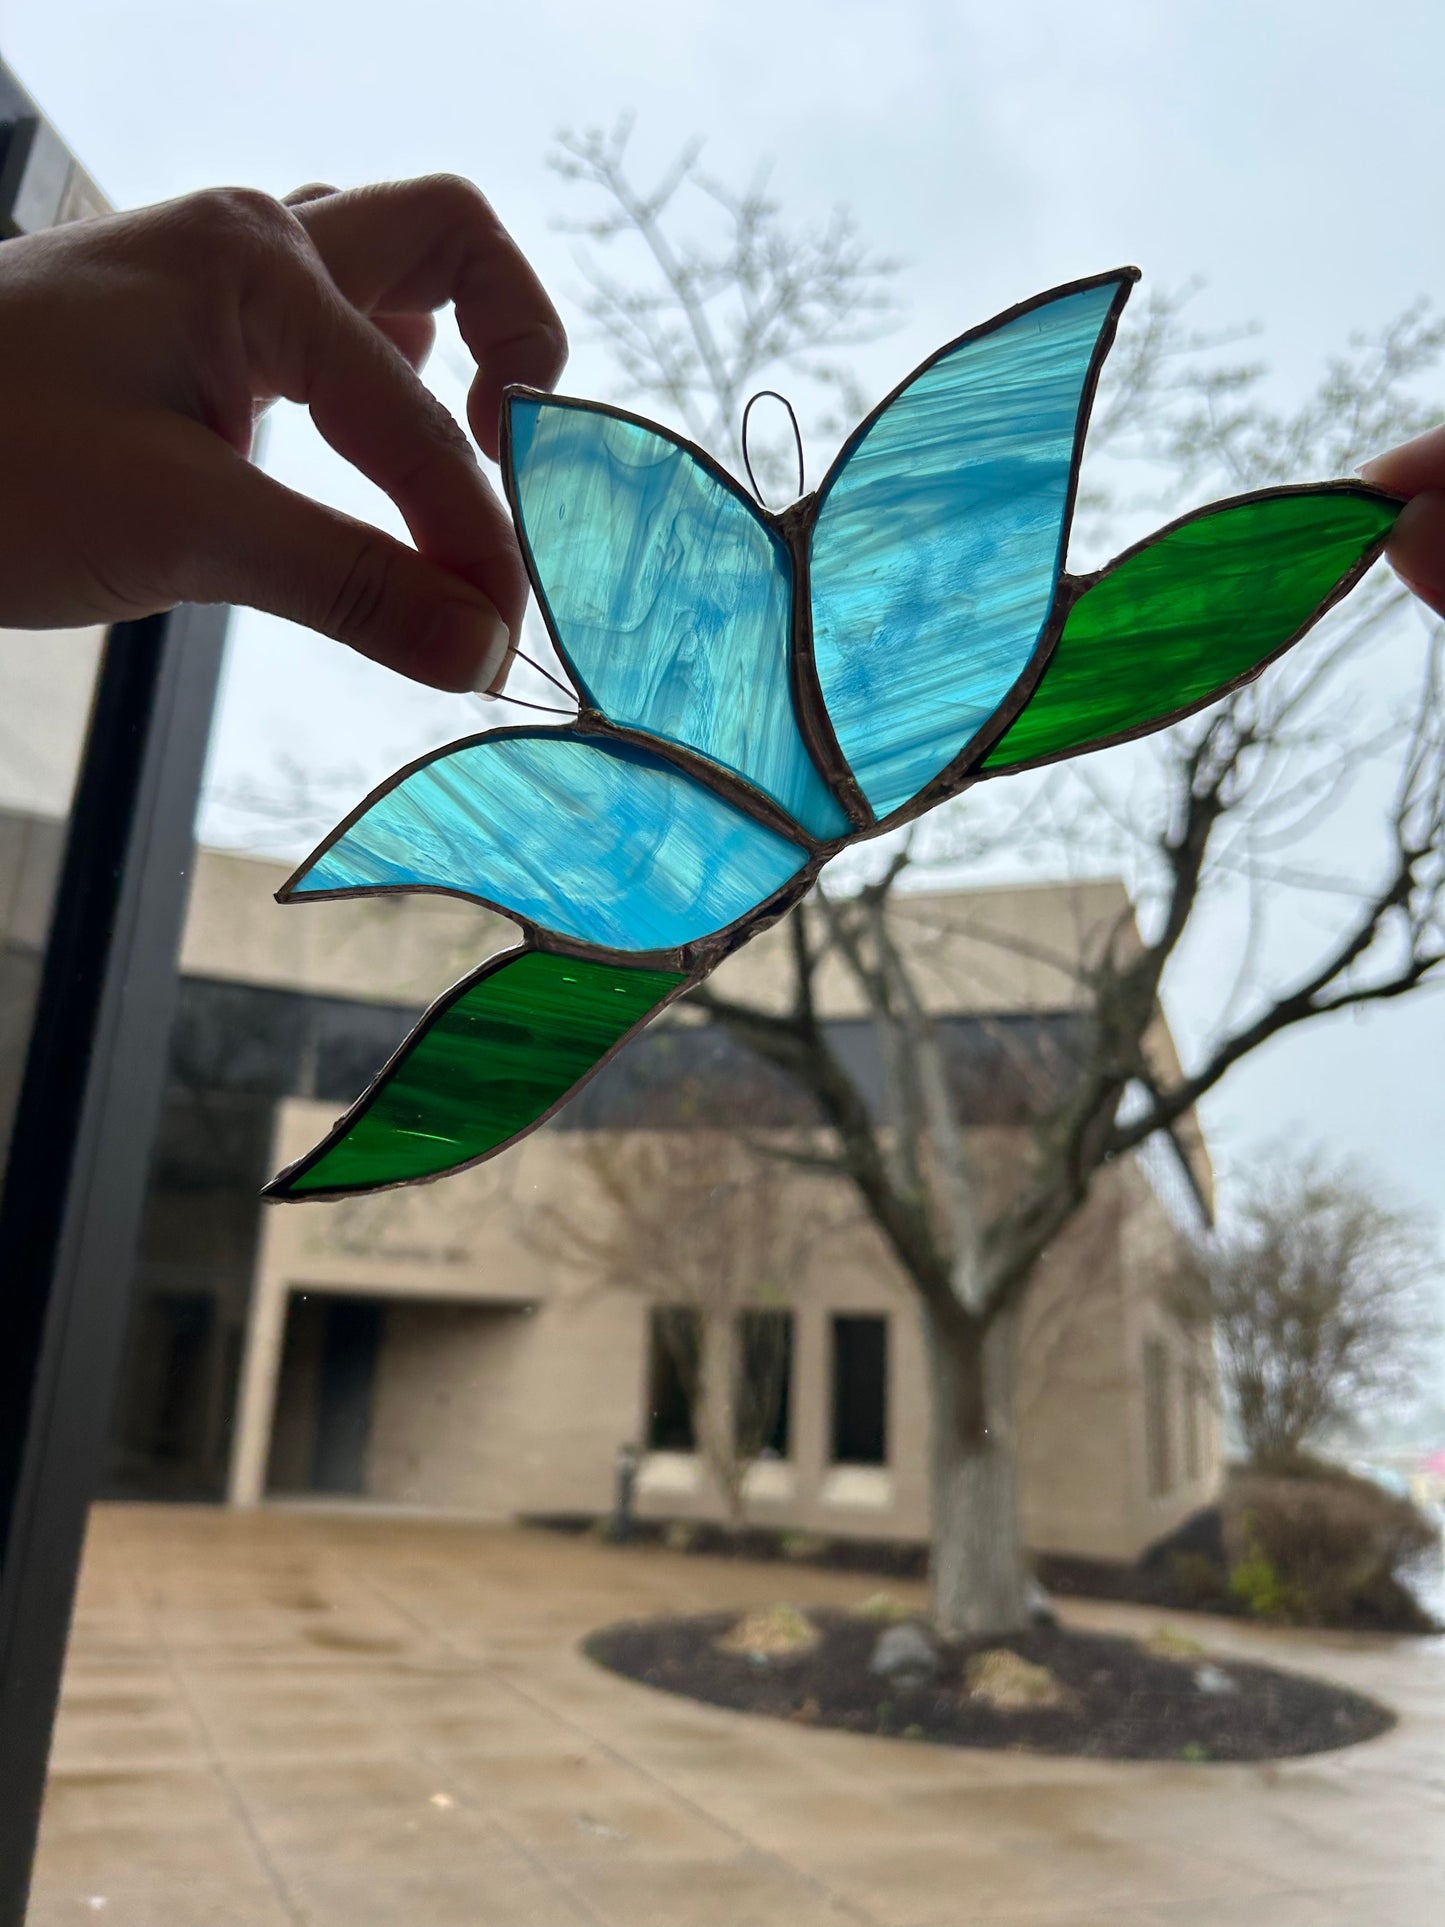 Beginner Stained Glass class, March 21, 11-2